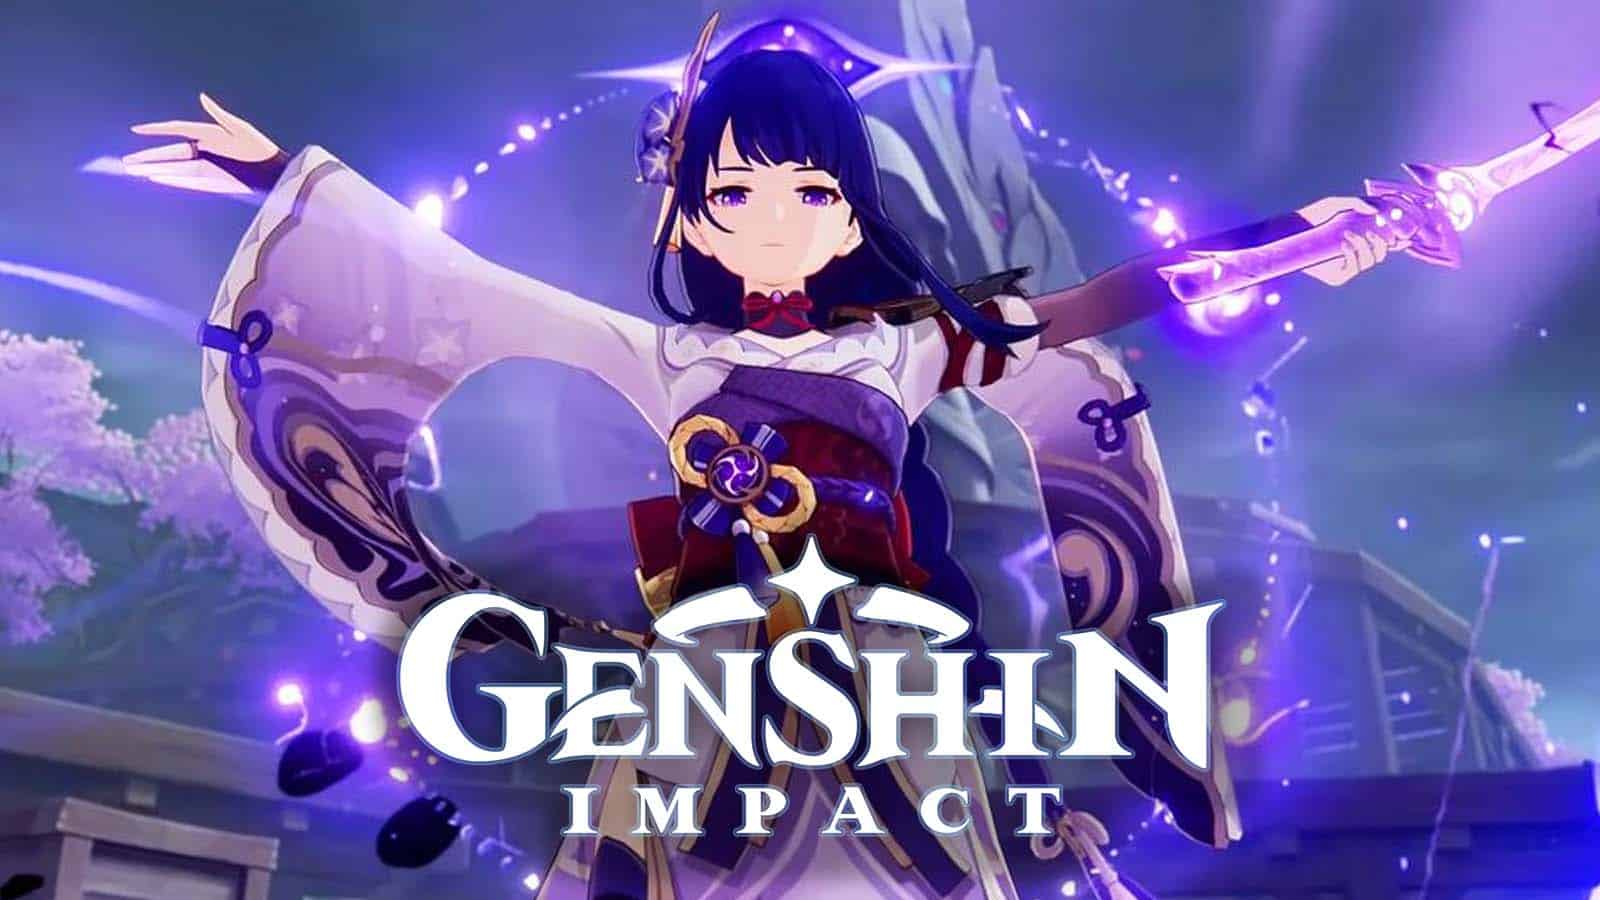 Genshin Impact fans are suing developer miHoYo for changing popular character